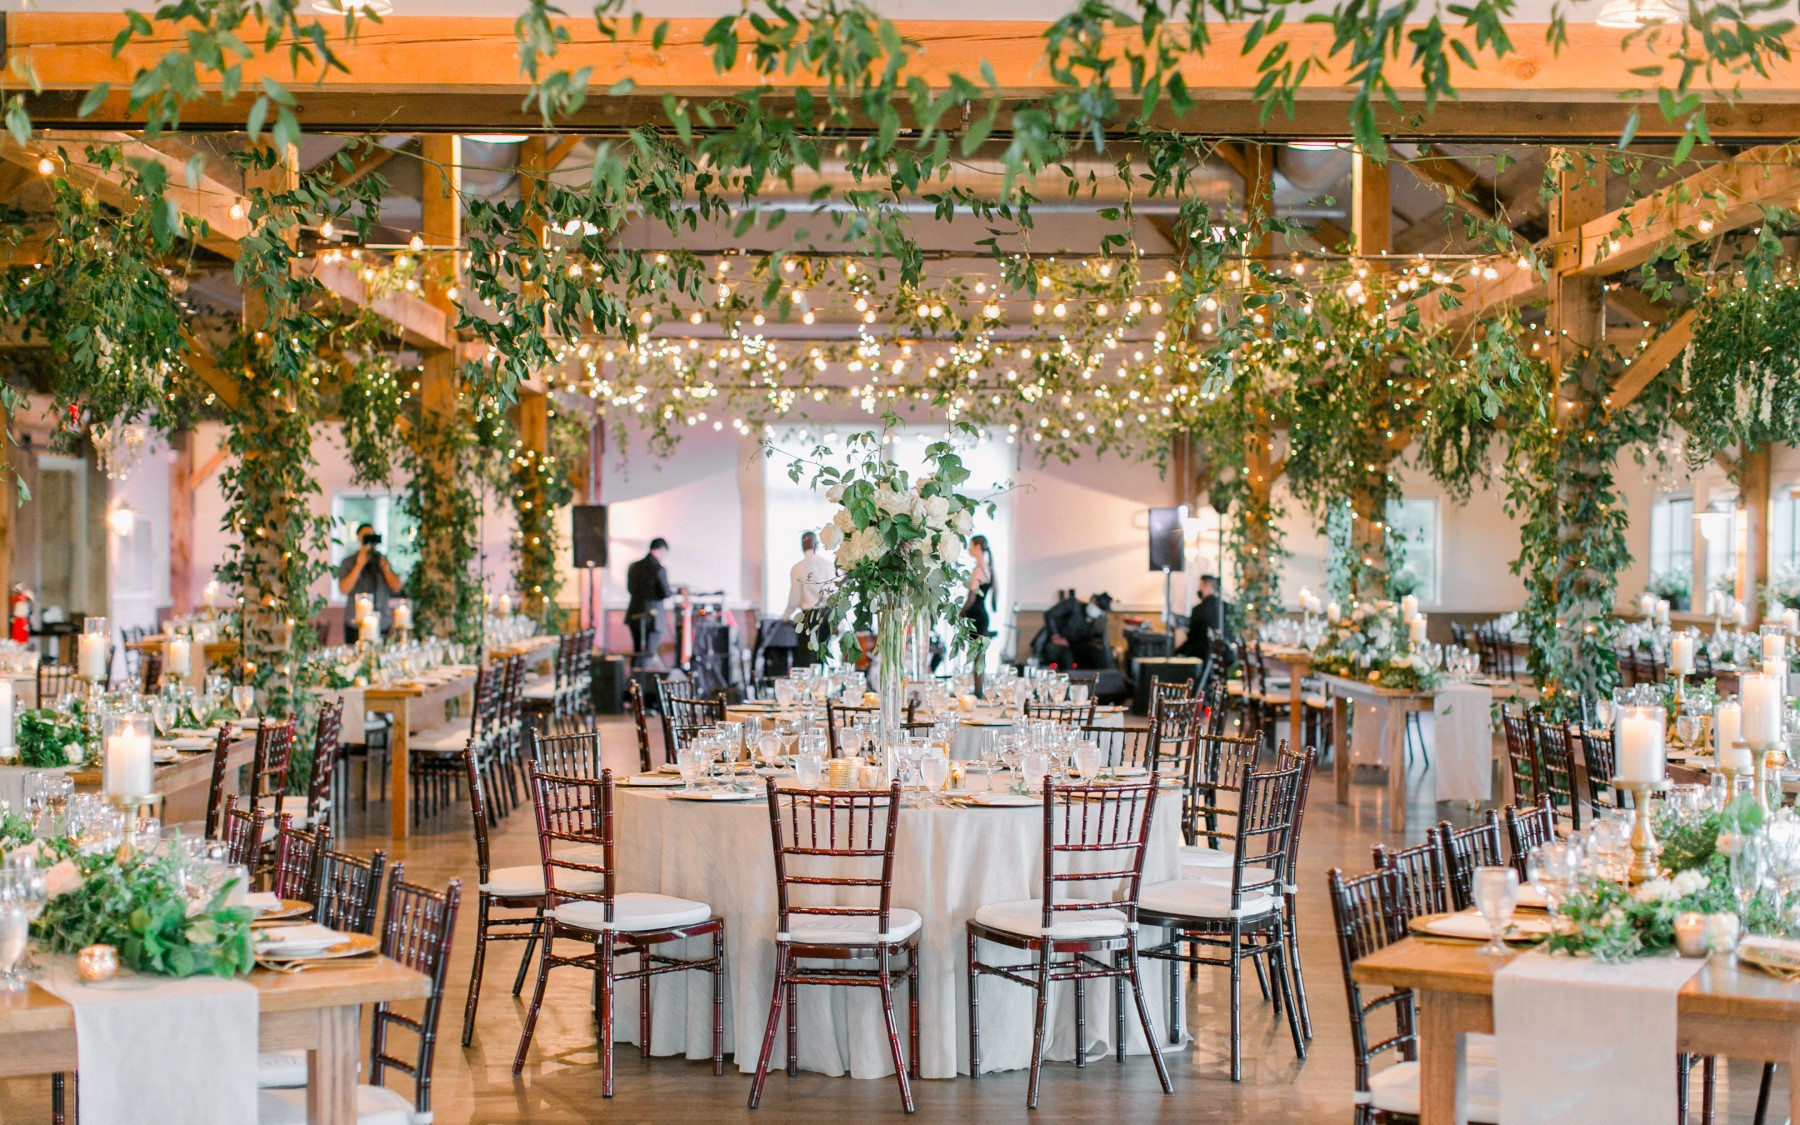 Event barn showcasing greenery, with white table rounds and greenery on tables along with floral arrangements.